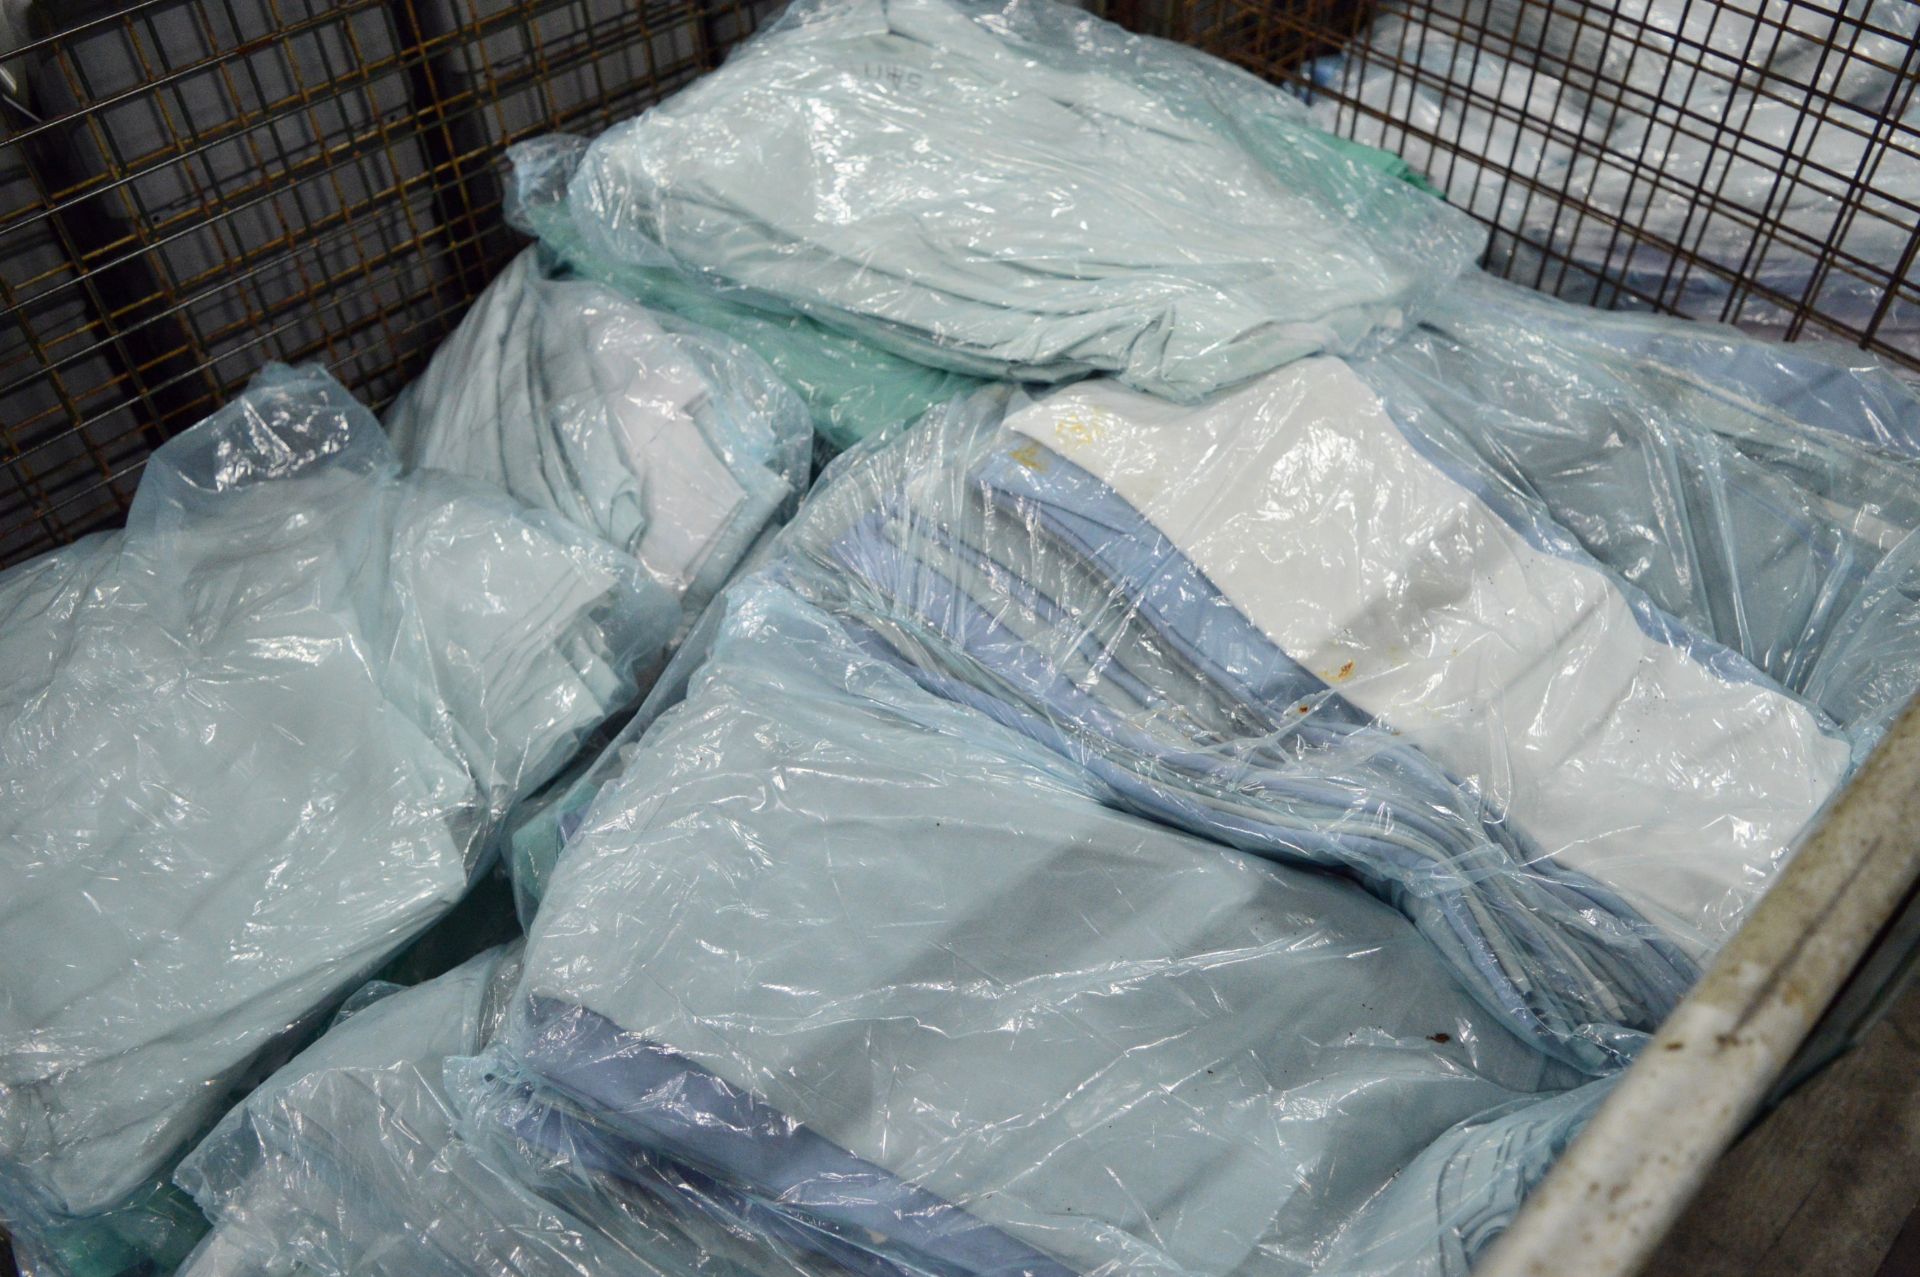 74x Packs of Bed Linen. - Image 2 of 2